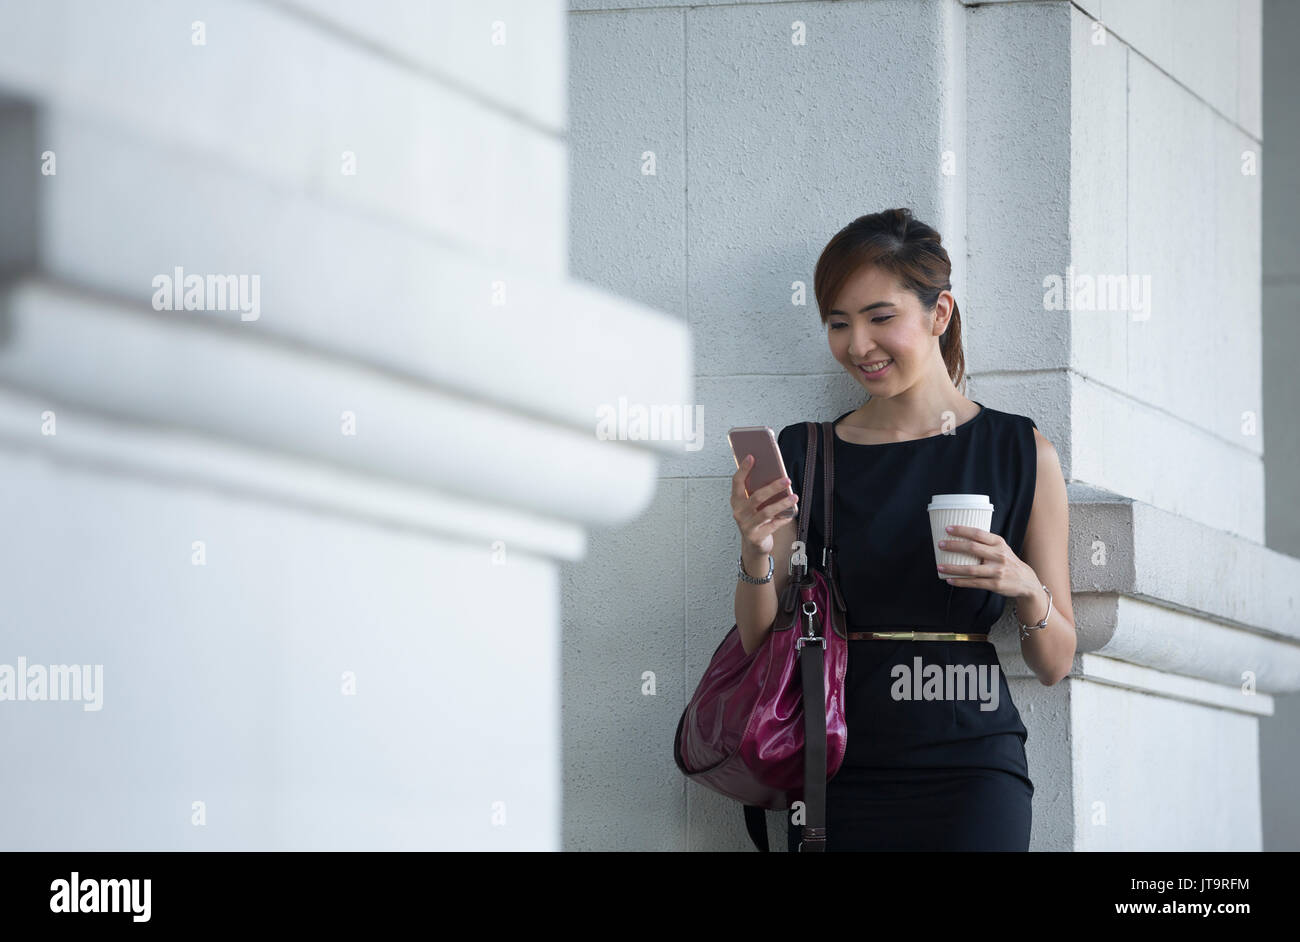 Portrait of an Chinese businesswoman standing outside using her smart phone. Stock Photo